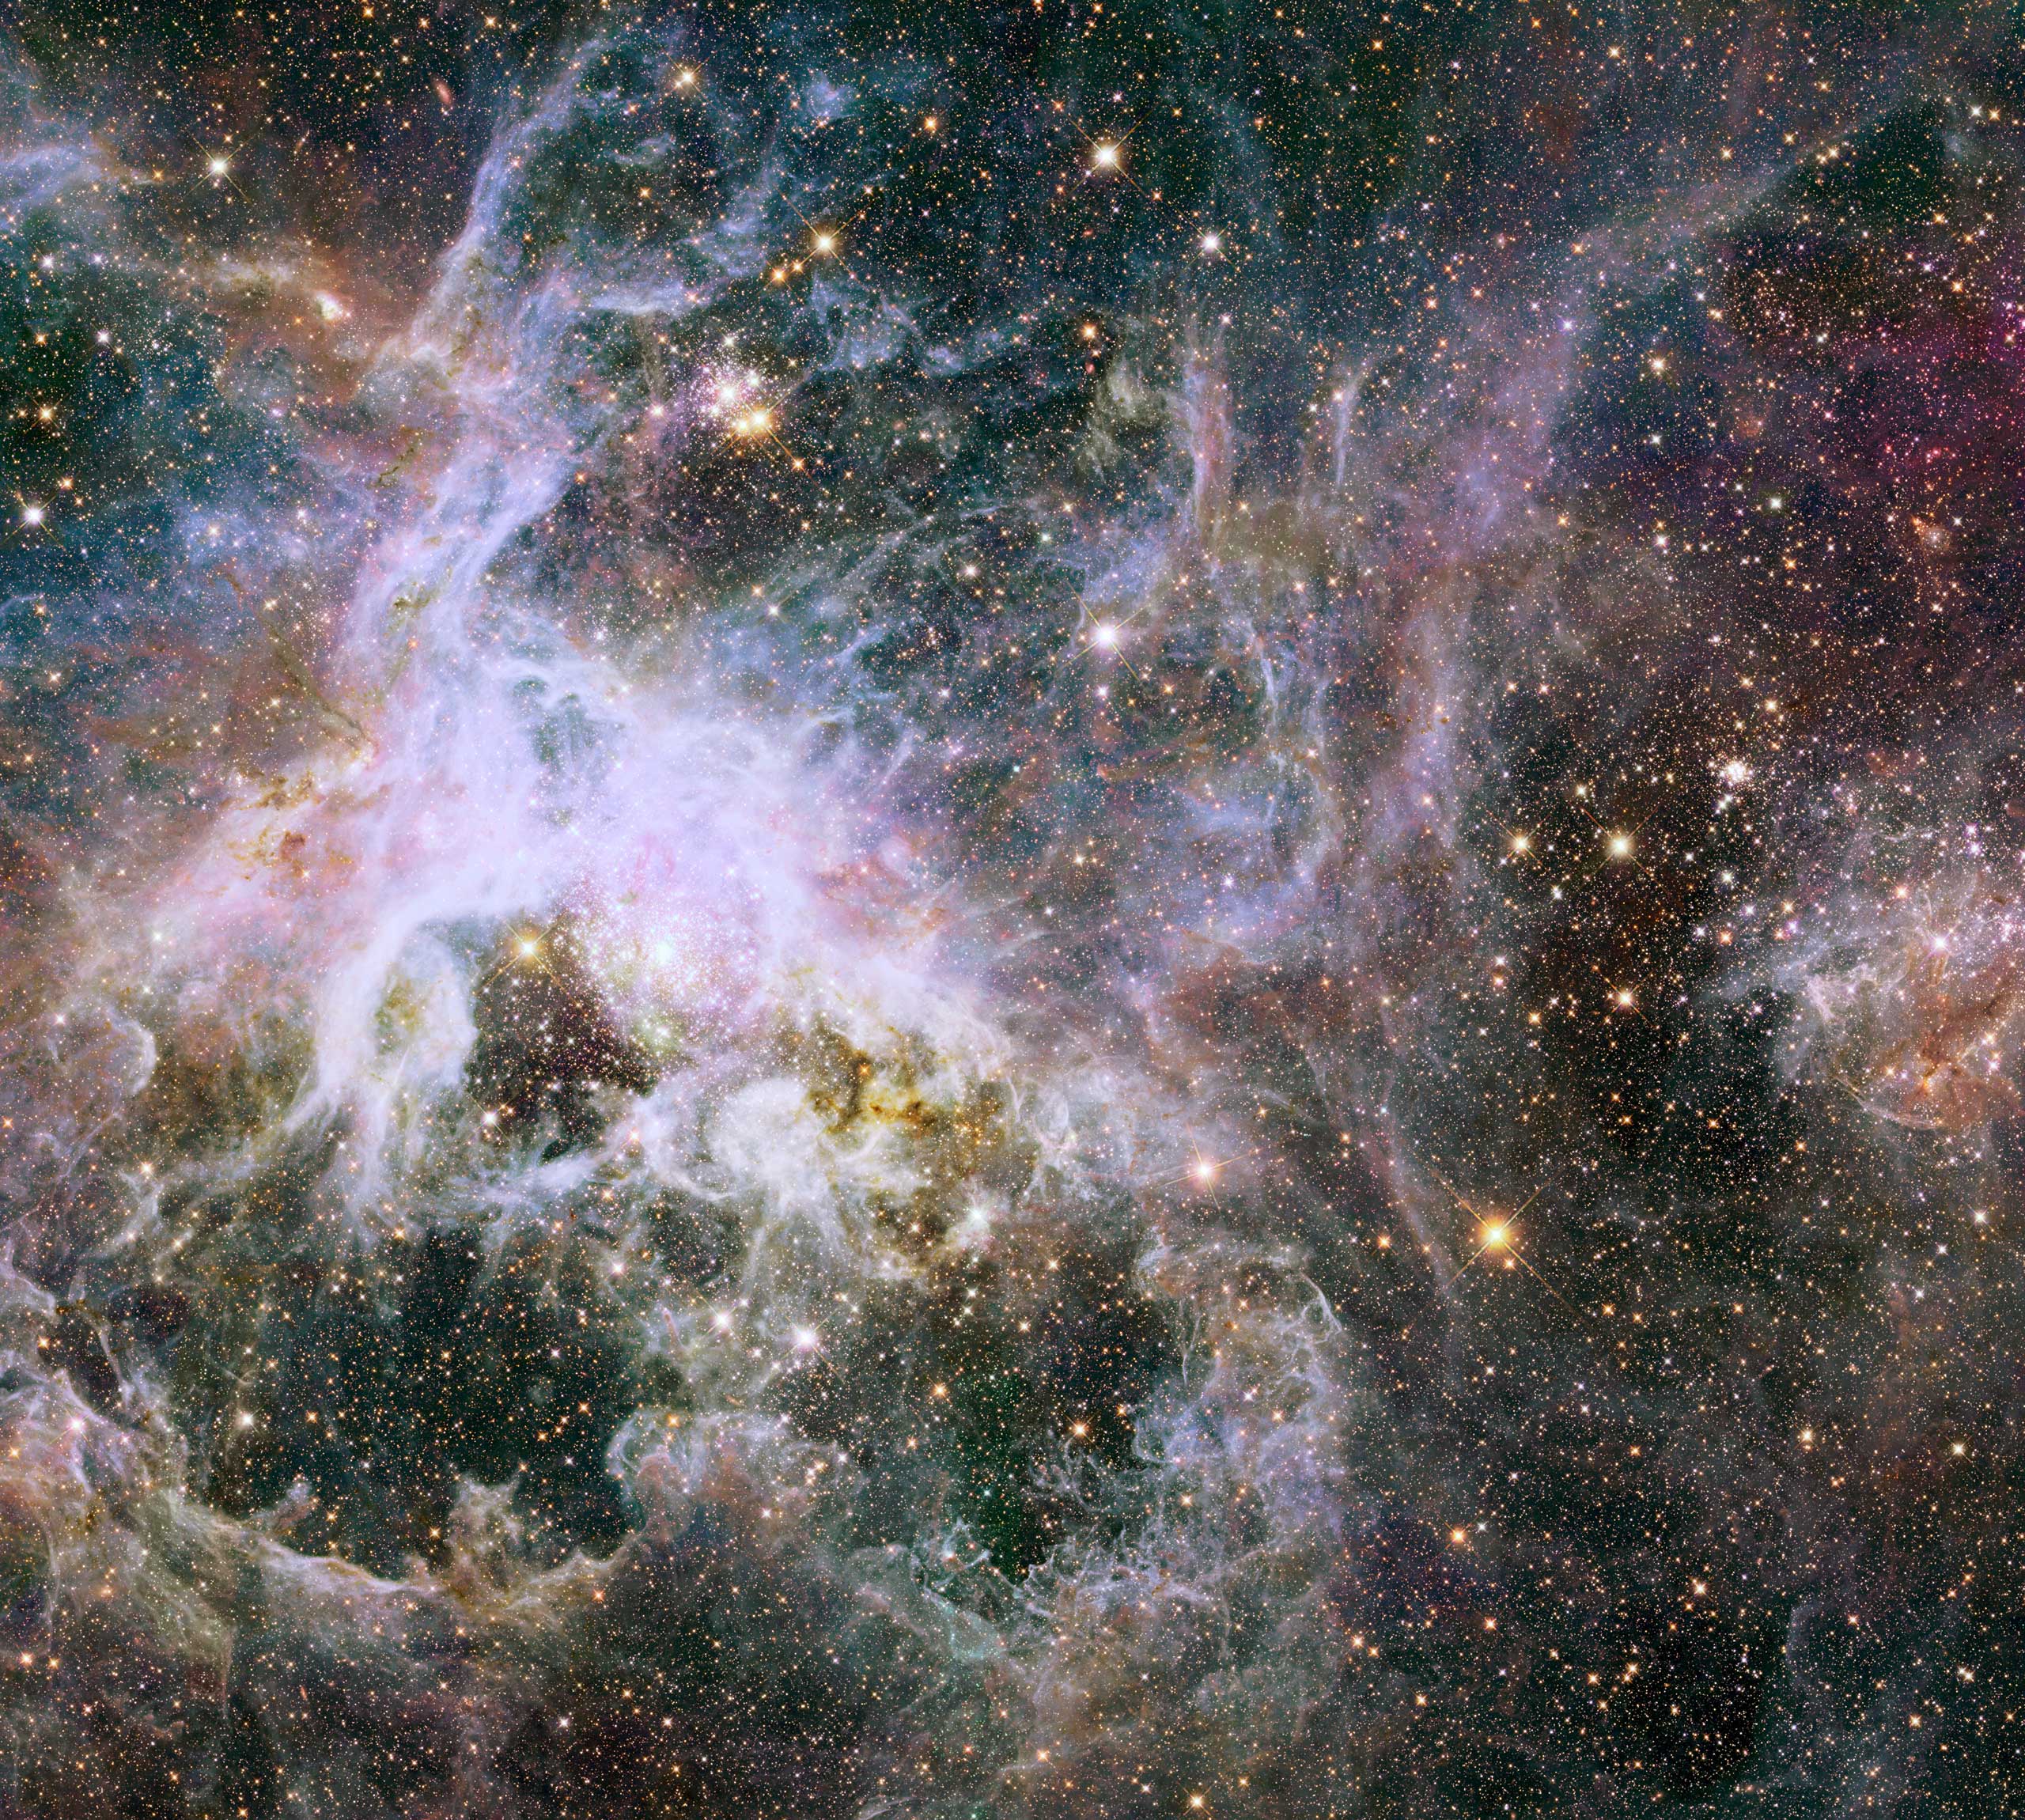 New Hubble infrared view of the Tarantula Nebula released on Jan. 9, 2014.